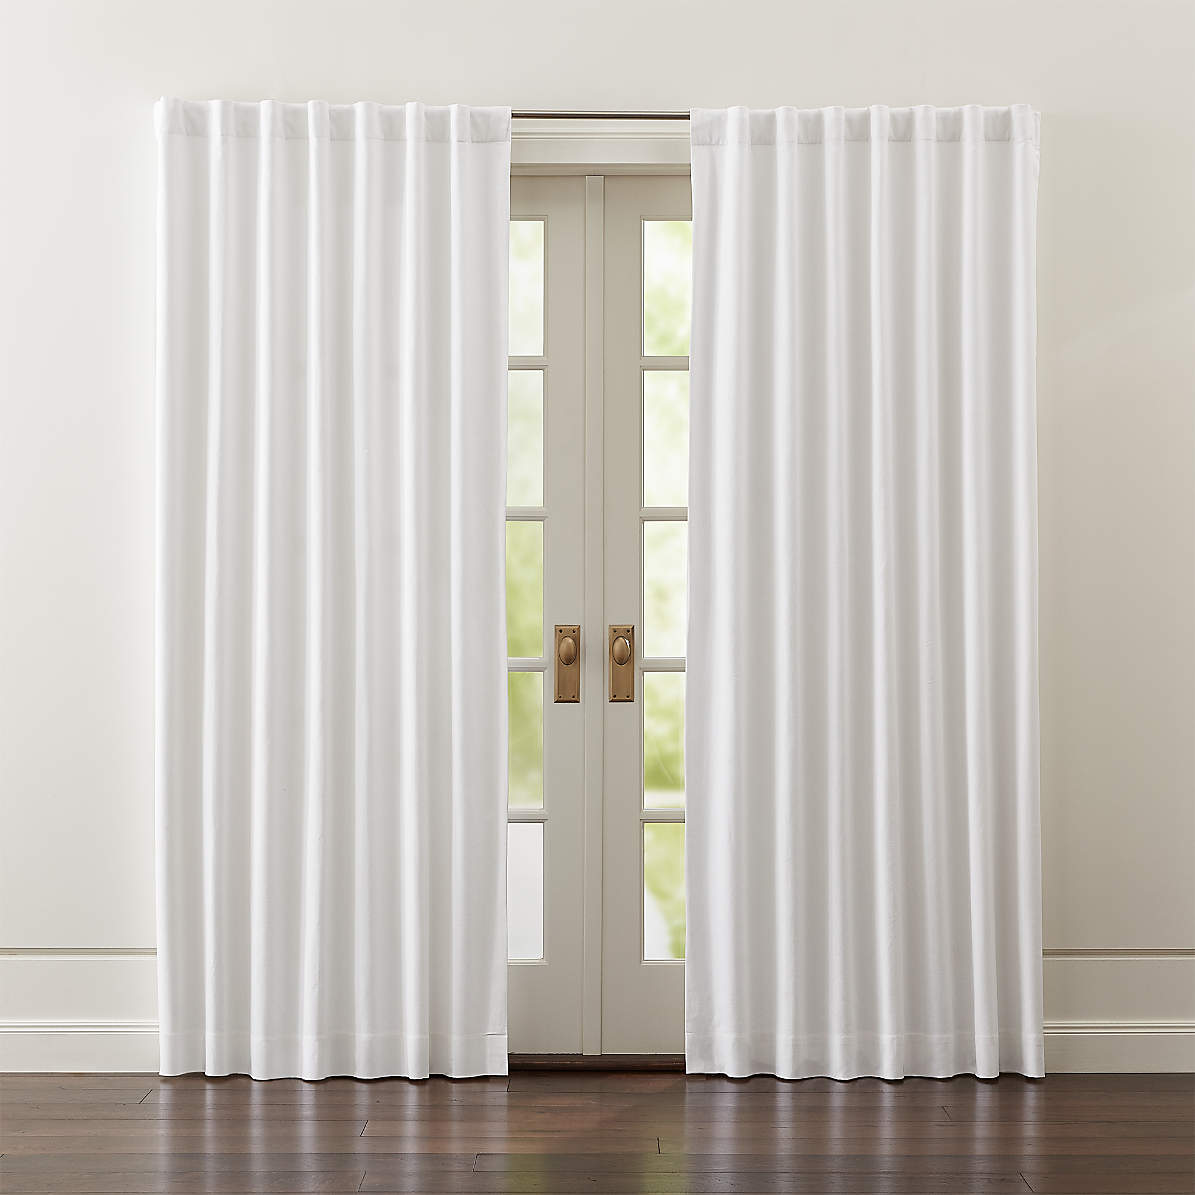 Wallace White Blackout Curtains Crate, Short White Blackout Curtains Canada